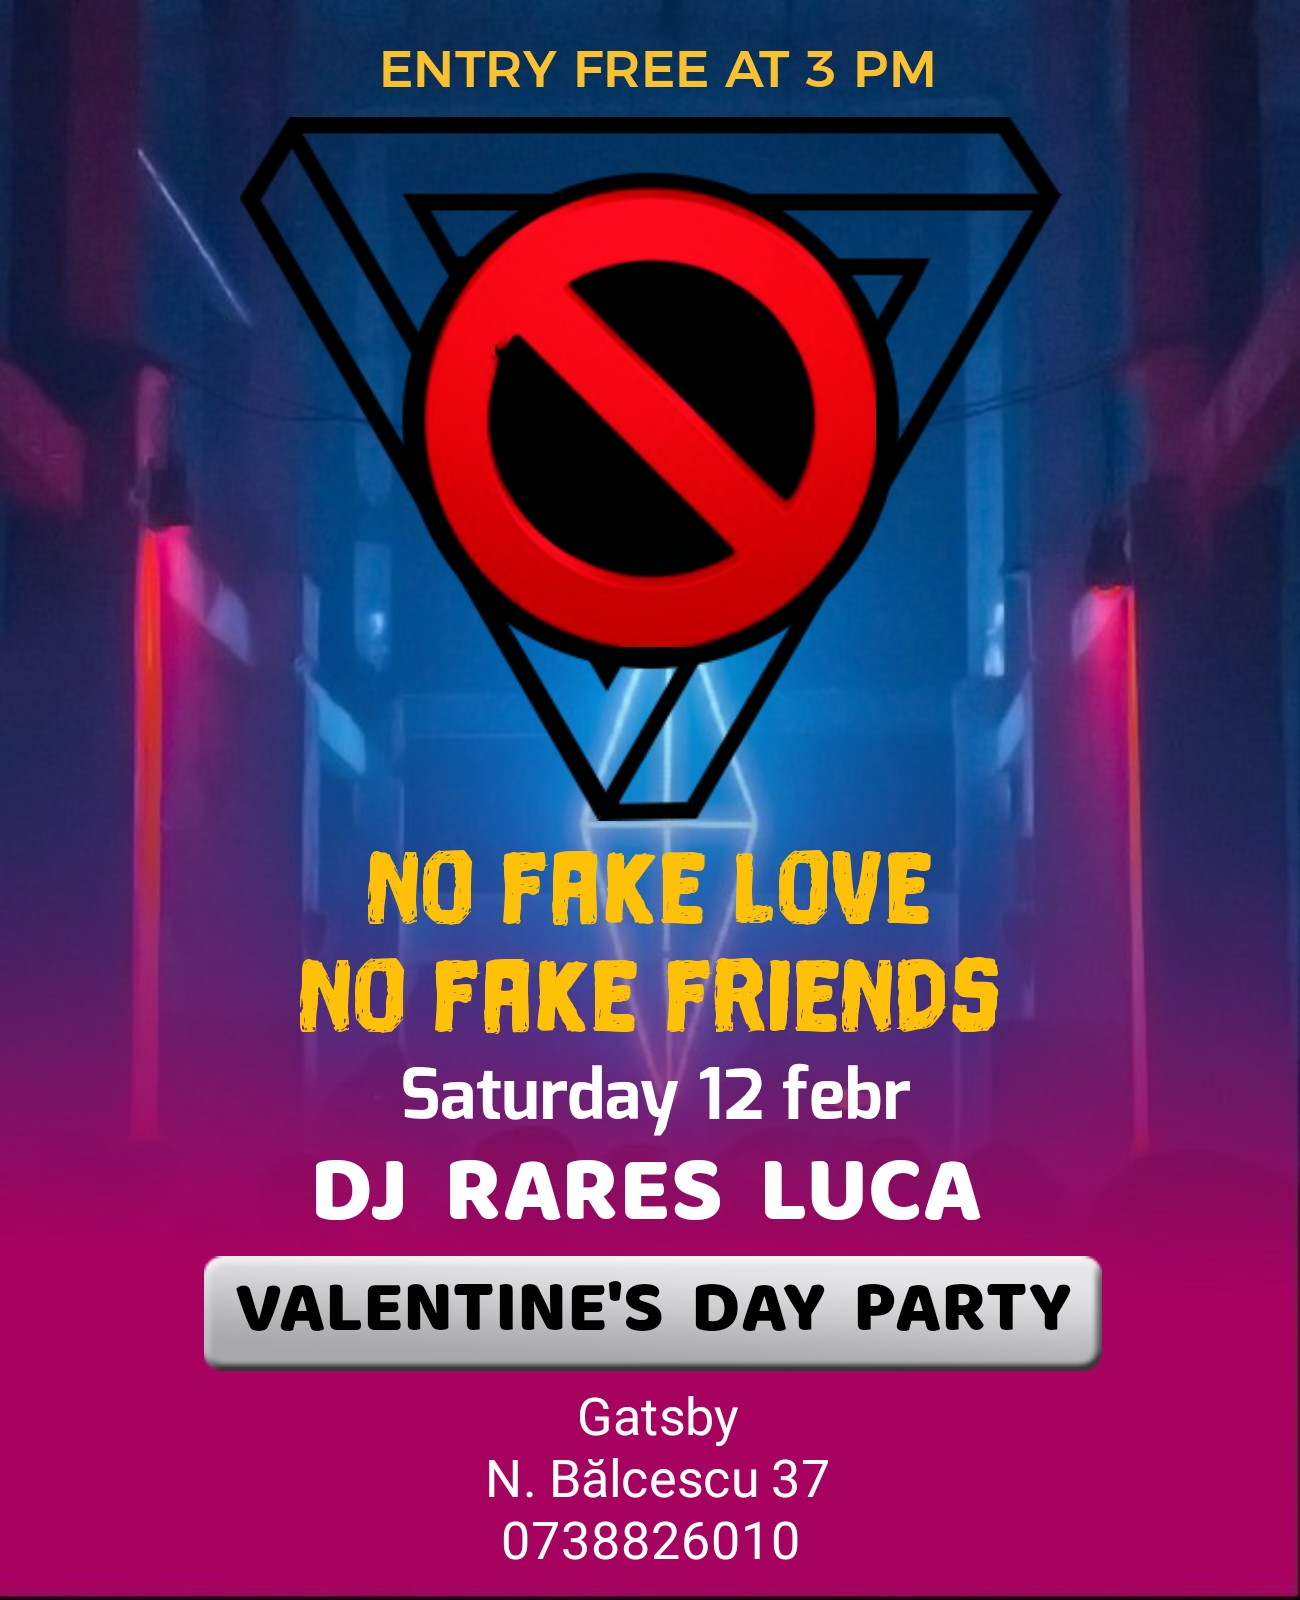 Valentine's Day Party with Dj Rares Luca